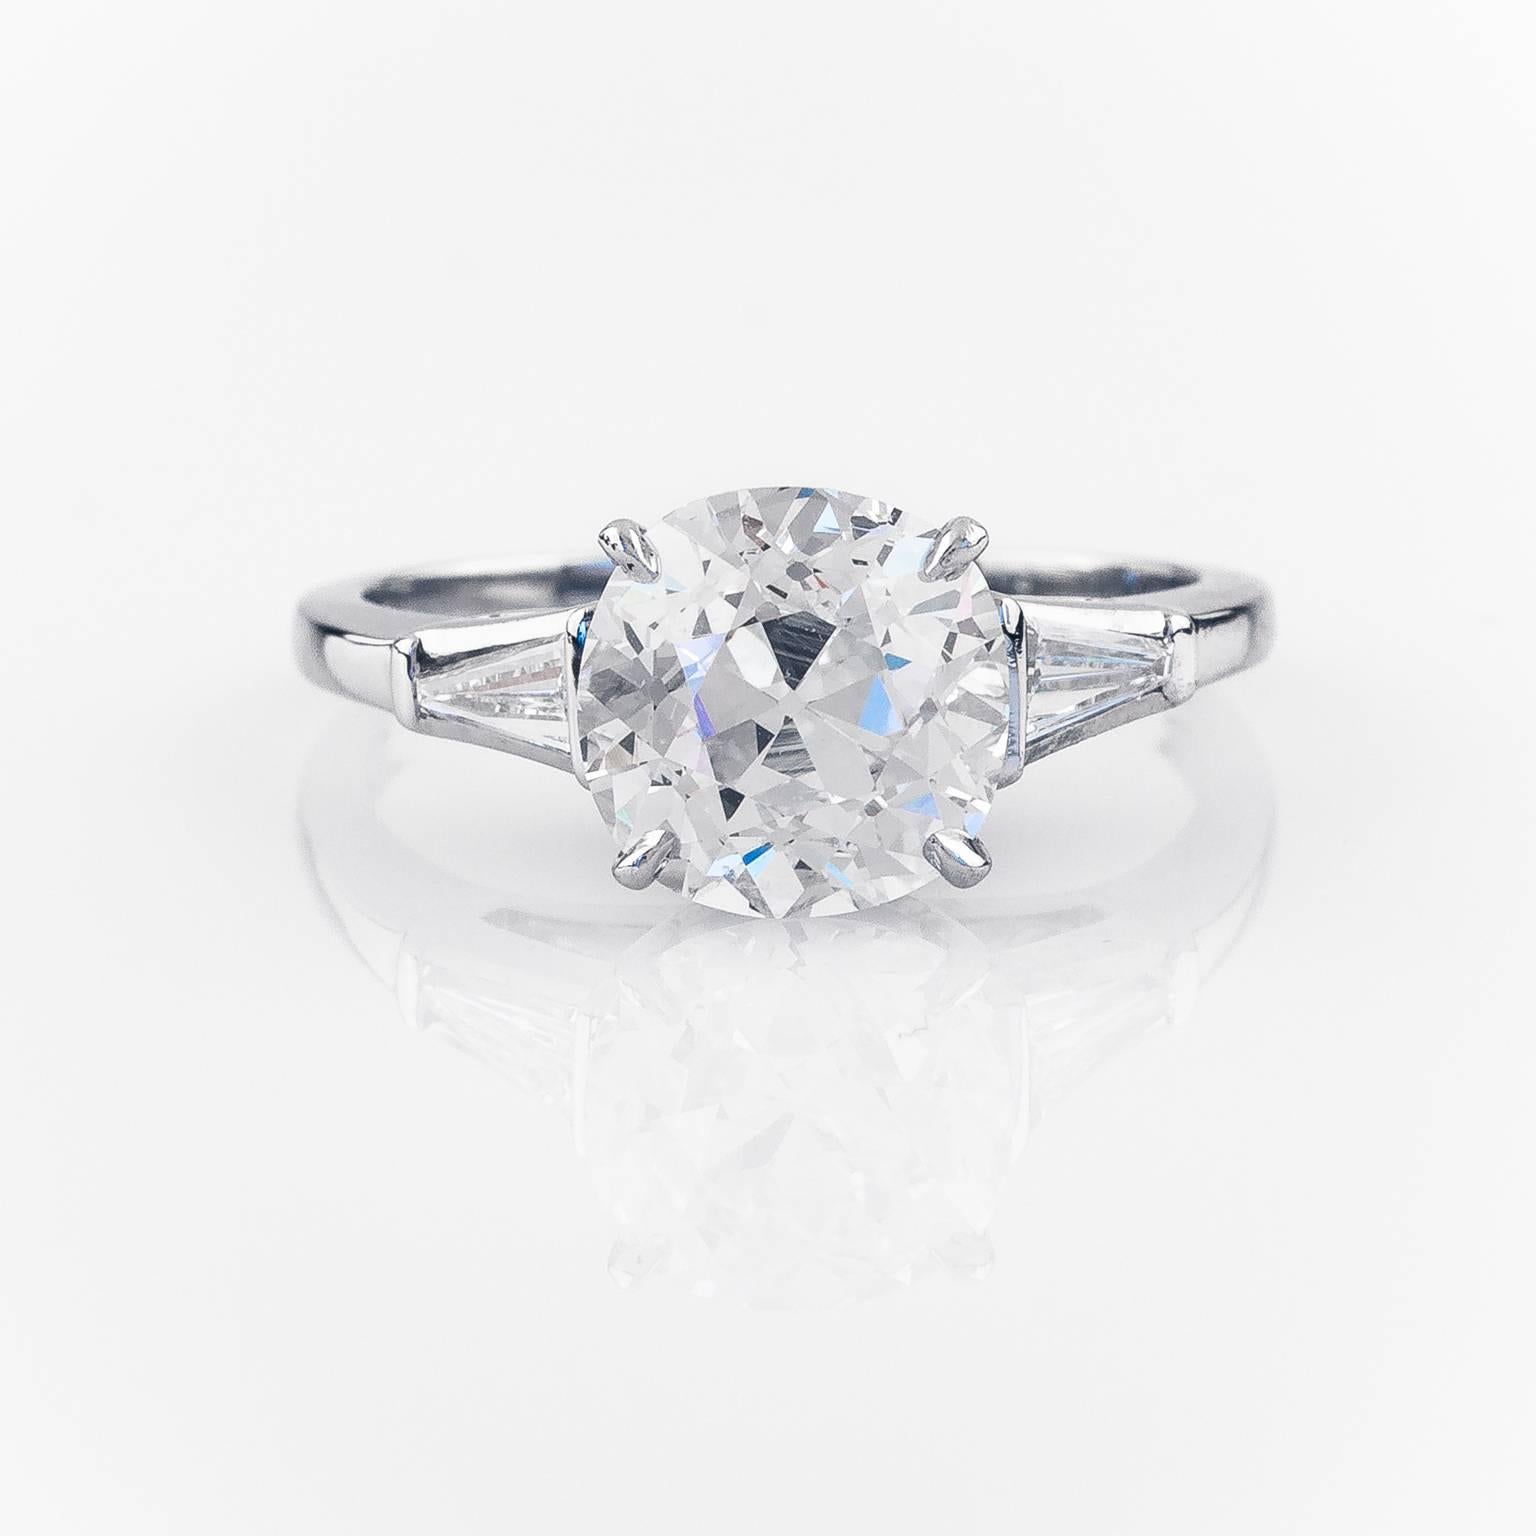 This stunning platinum engagement ring features a beautiful old mine cut diamond is set in a vintage platinum mounting accented with two tapered baguette cut diamonds.

2.51 ctw Old Mine Cut Diamond VS1 - J GIA  Report #5171585884
0.33 cttw